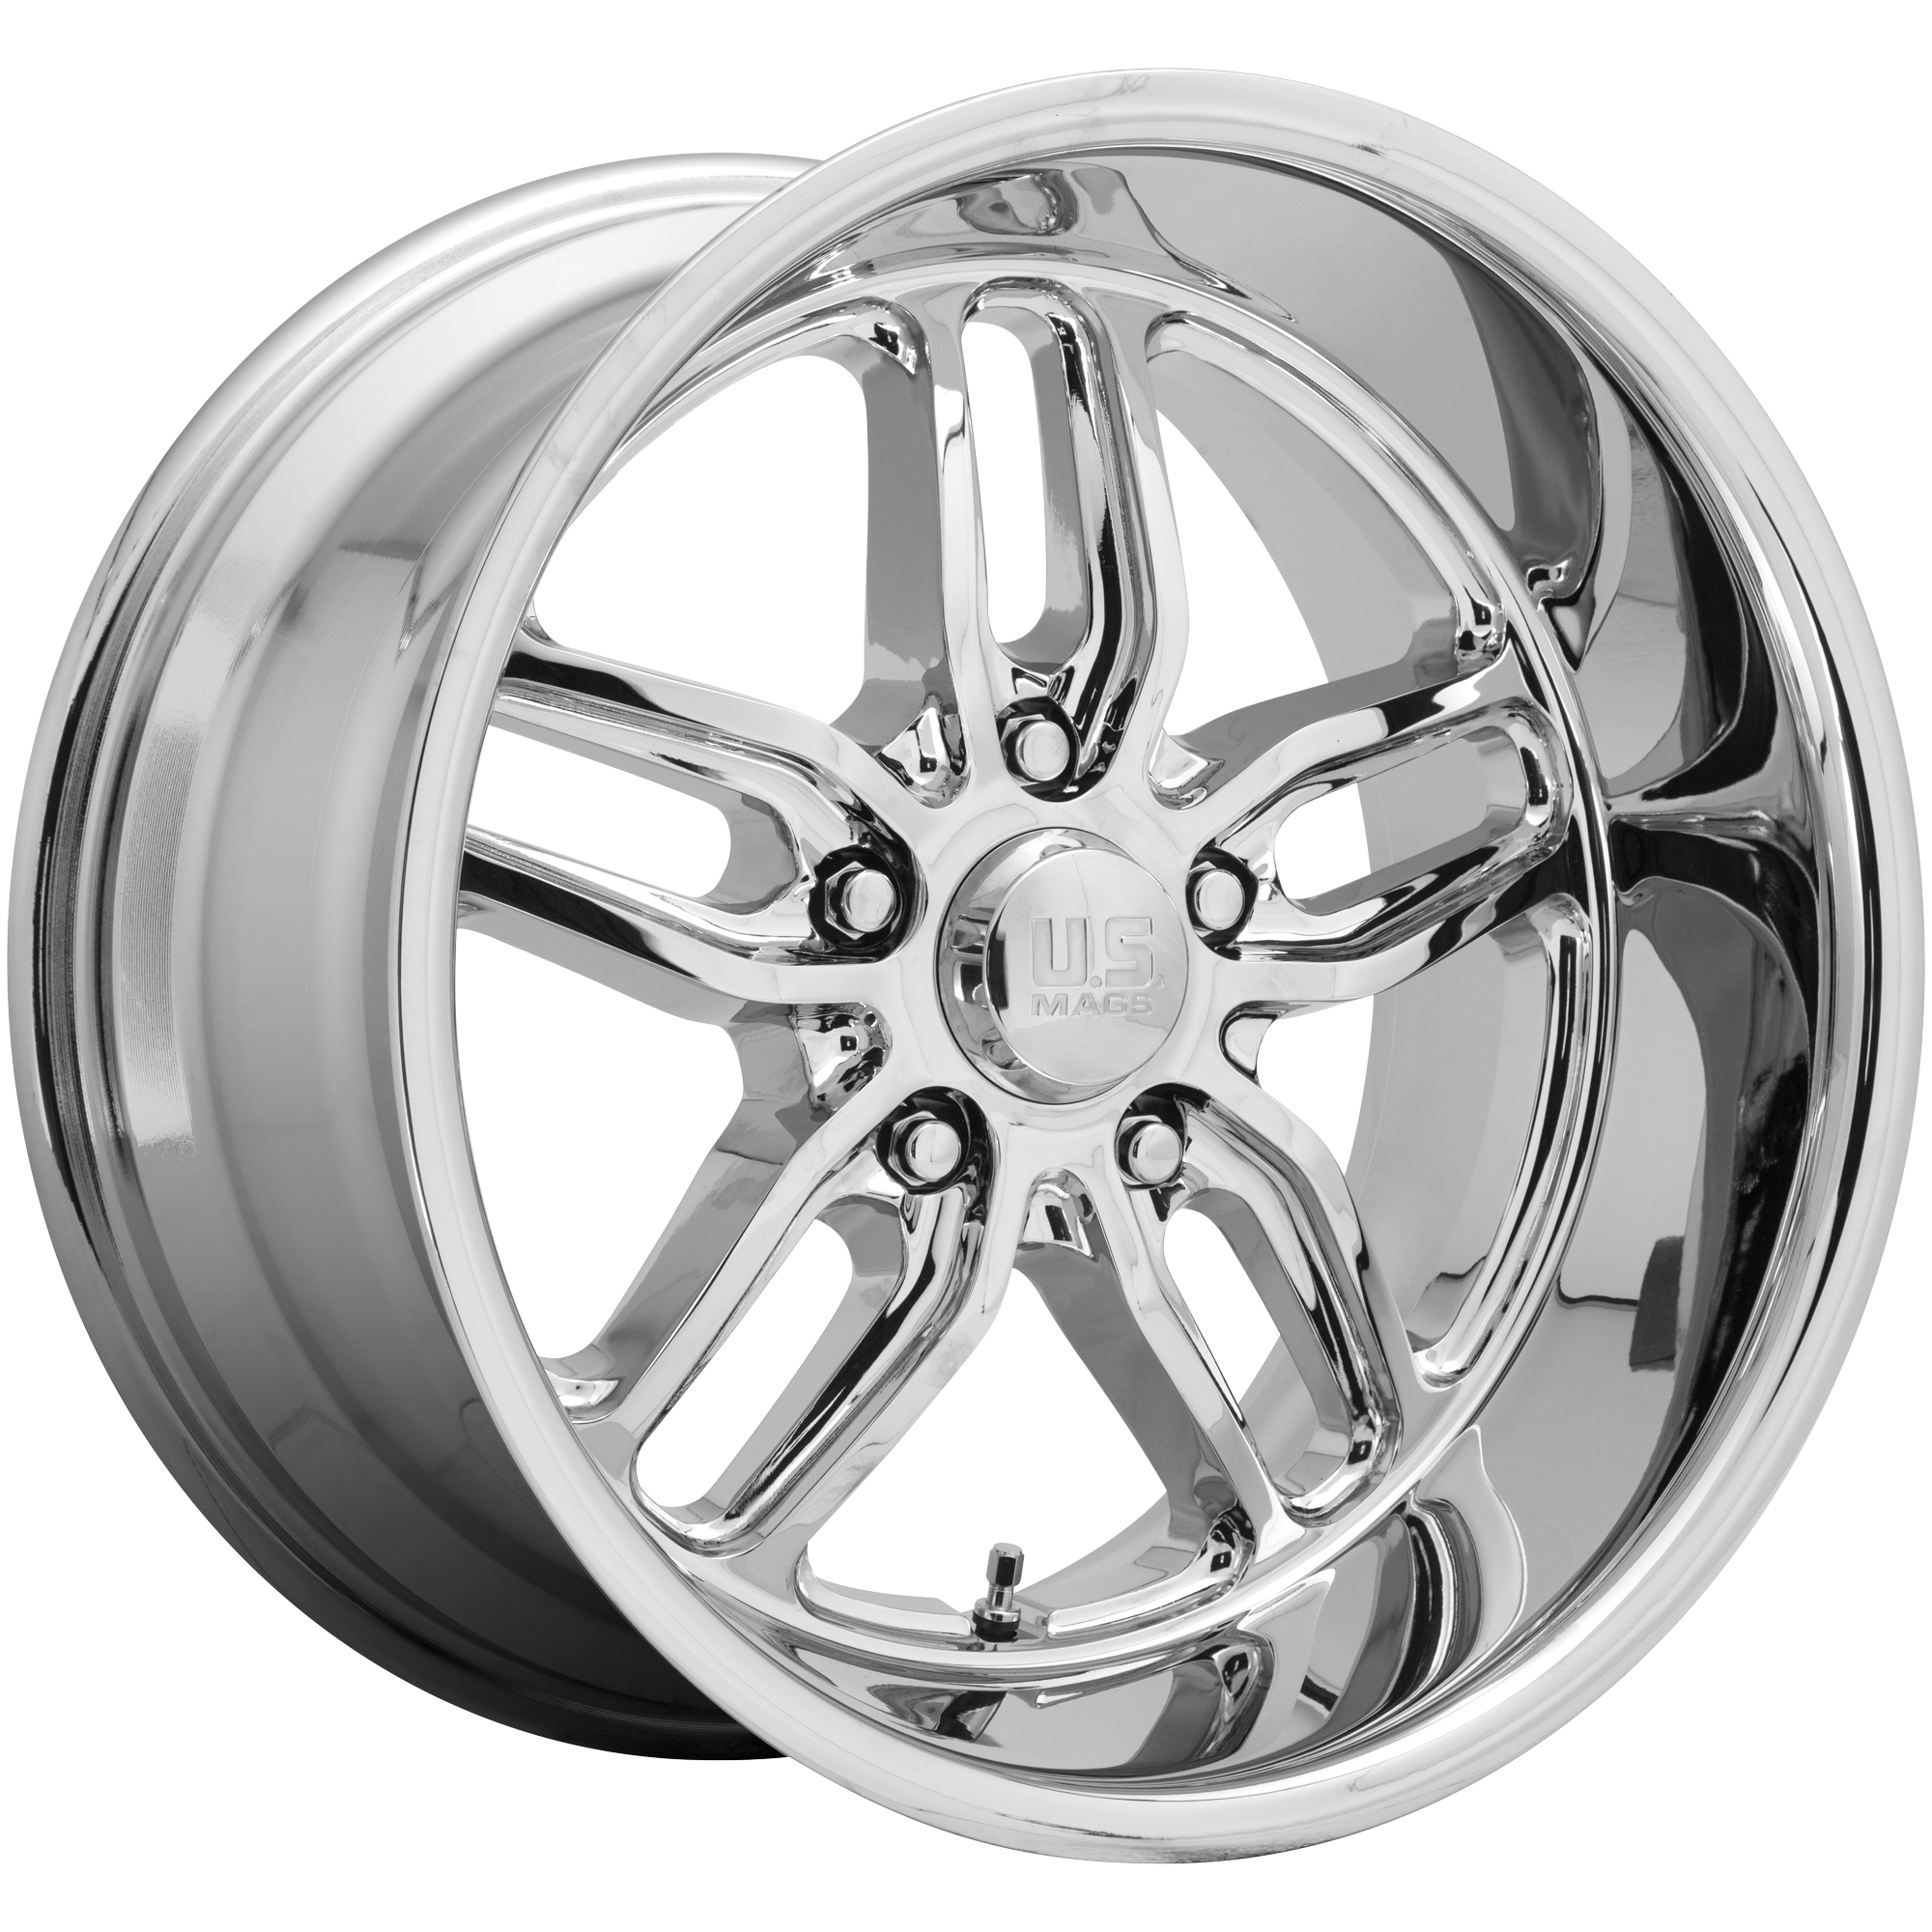 CTEN 18x9.5 5x120.65 CHROME PLATED (1 mm) - Tires and Engine Performance